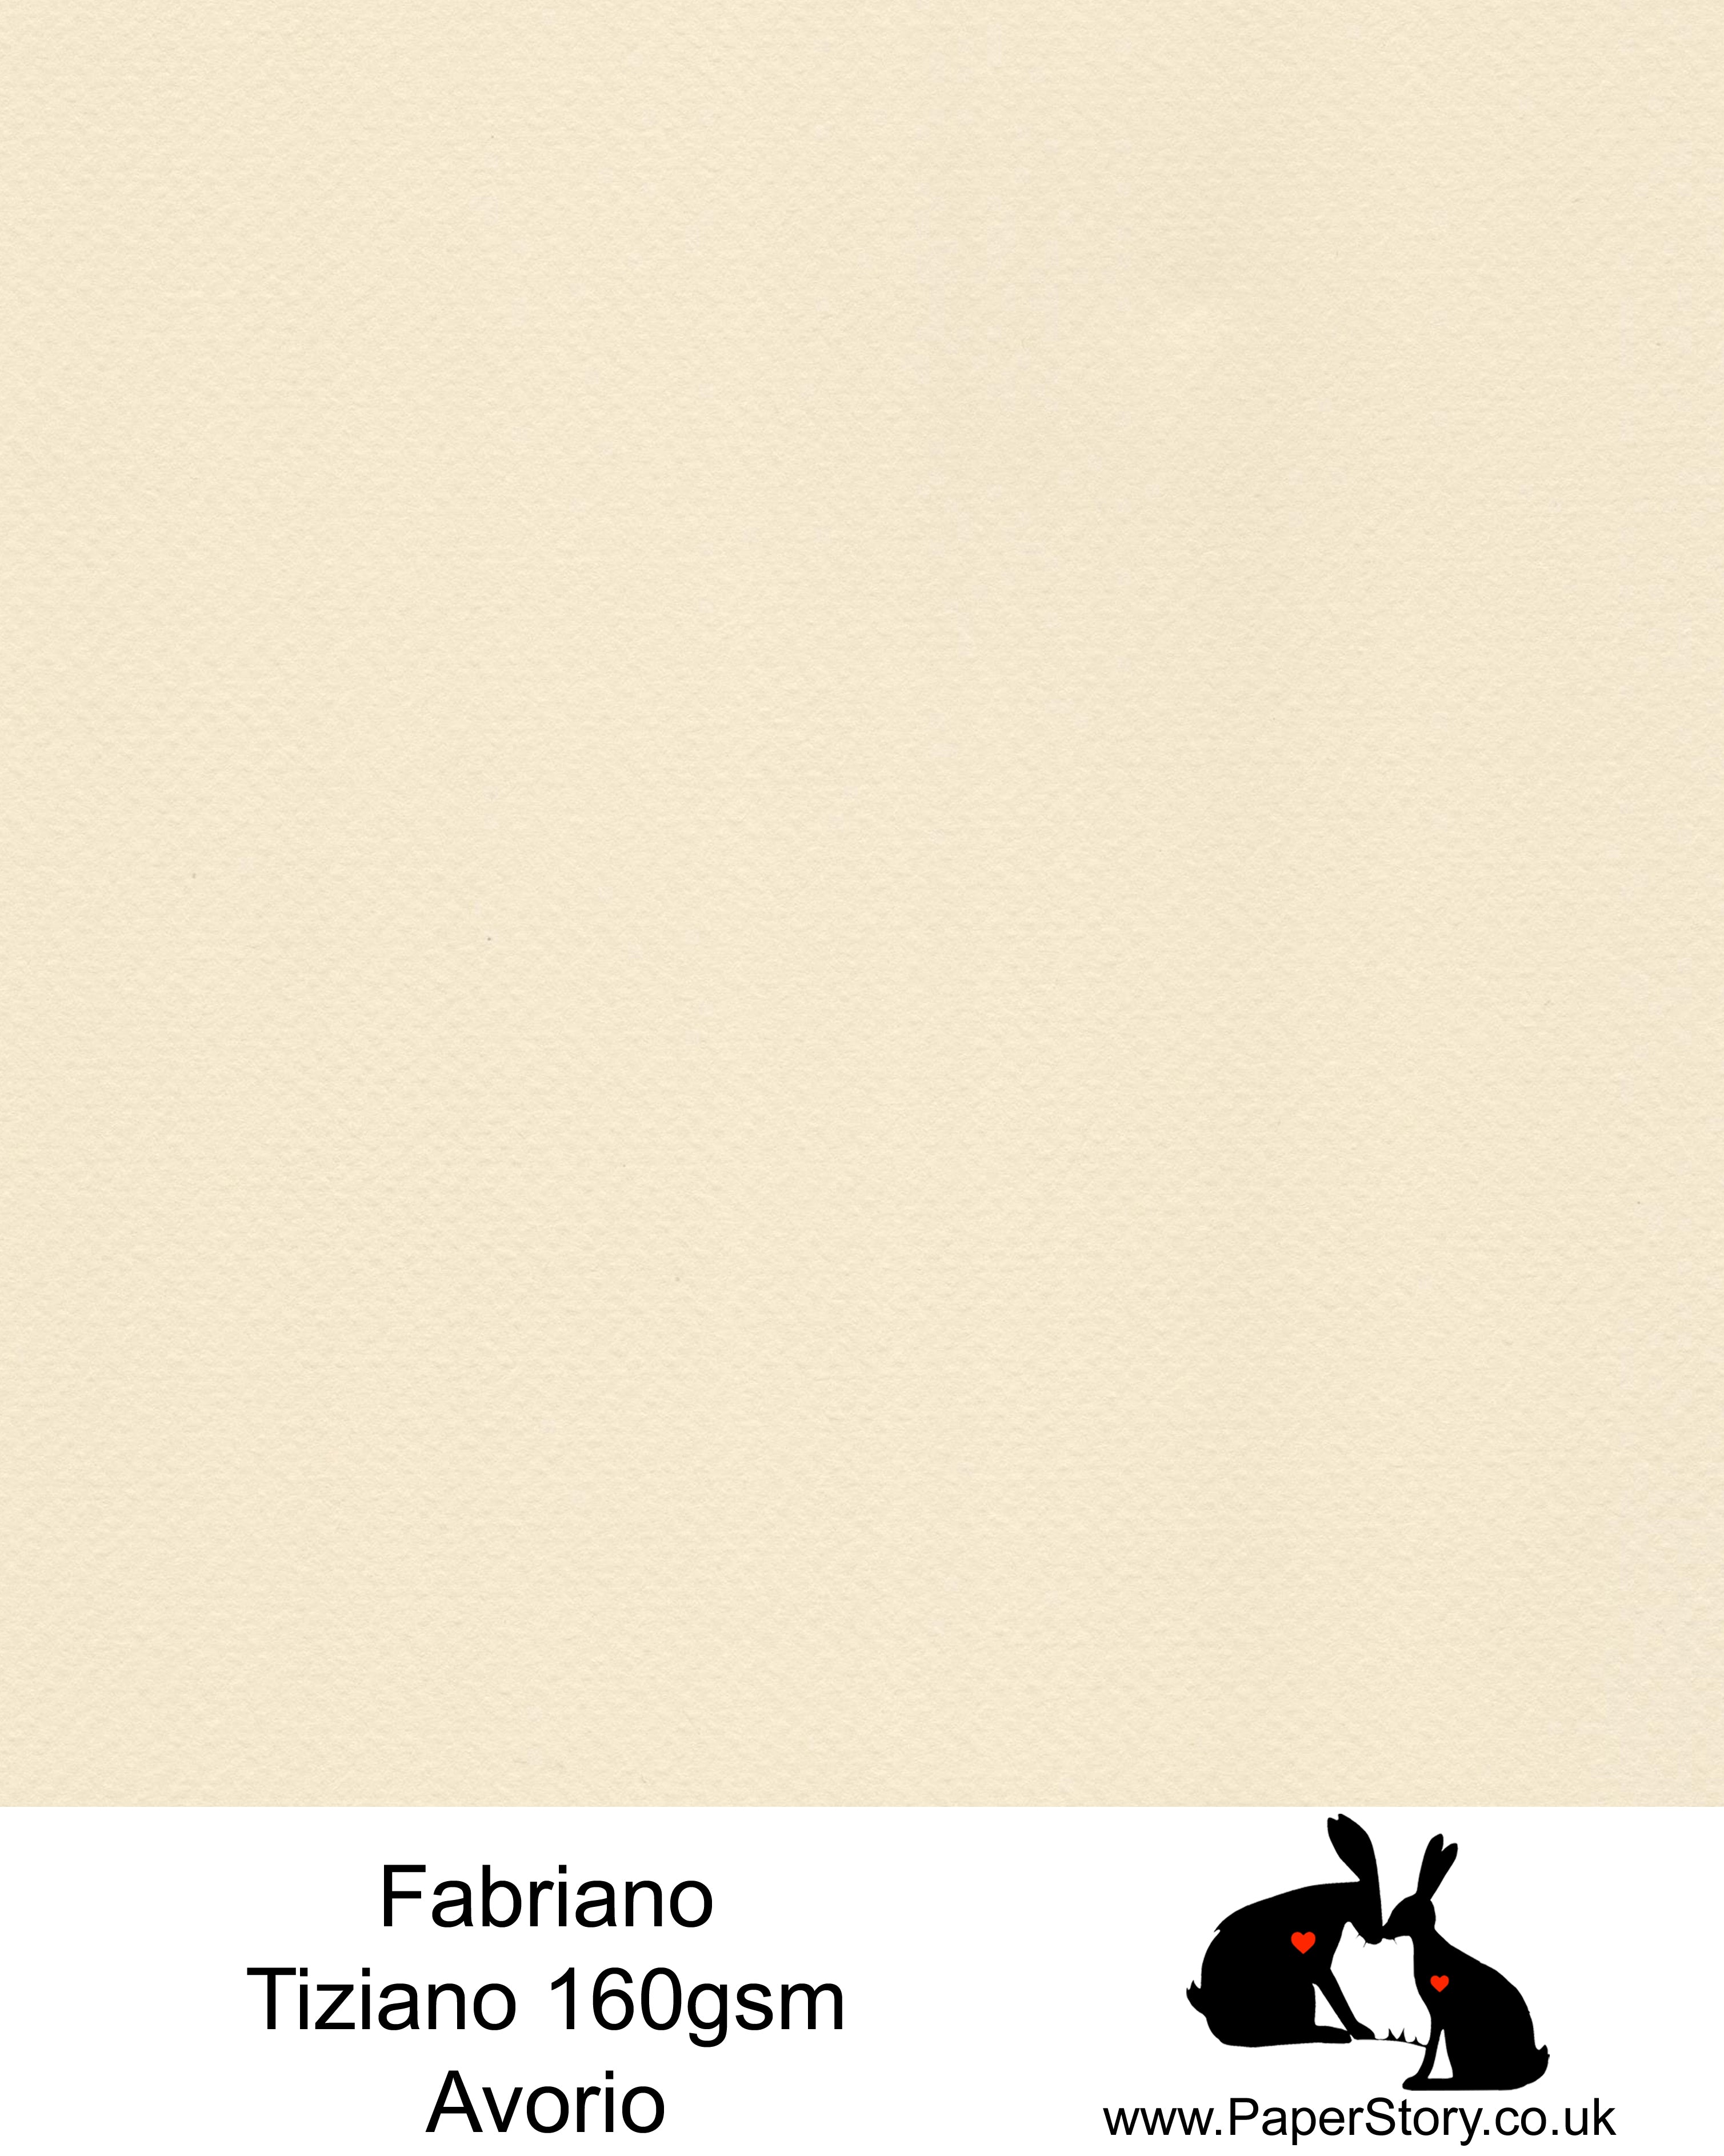 High quality paper from Italy, Avorio classic creamy Ivory Fabriano Tiziano is 160 gsm, Tiziano has a high cotton content, a textured naturally sized surface. This paper is acid free to guarantee long permanence in time, pH neutral. It has highly lightfast colours, an excellent surface making and sizing which make this paper particularly suitable for papercutting, pastels, pencil, graphite, charcoal, tempera, air brush and watercolour techniques. Tiziano can be used for all printing techniques.